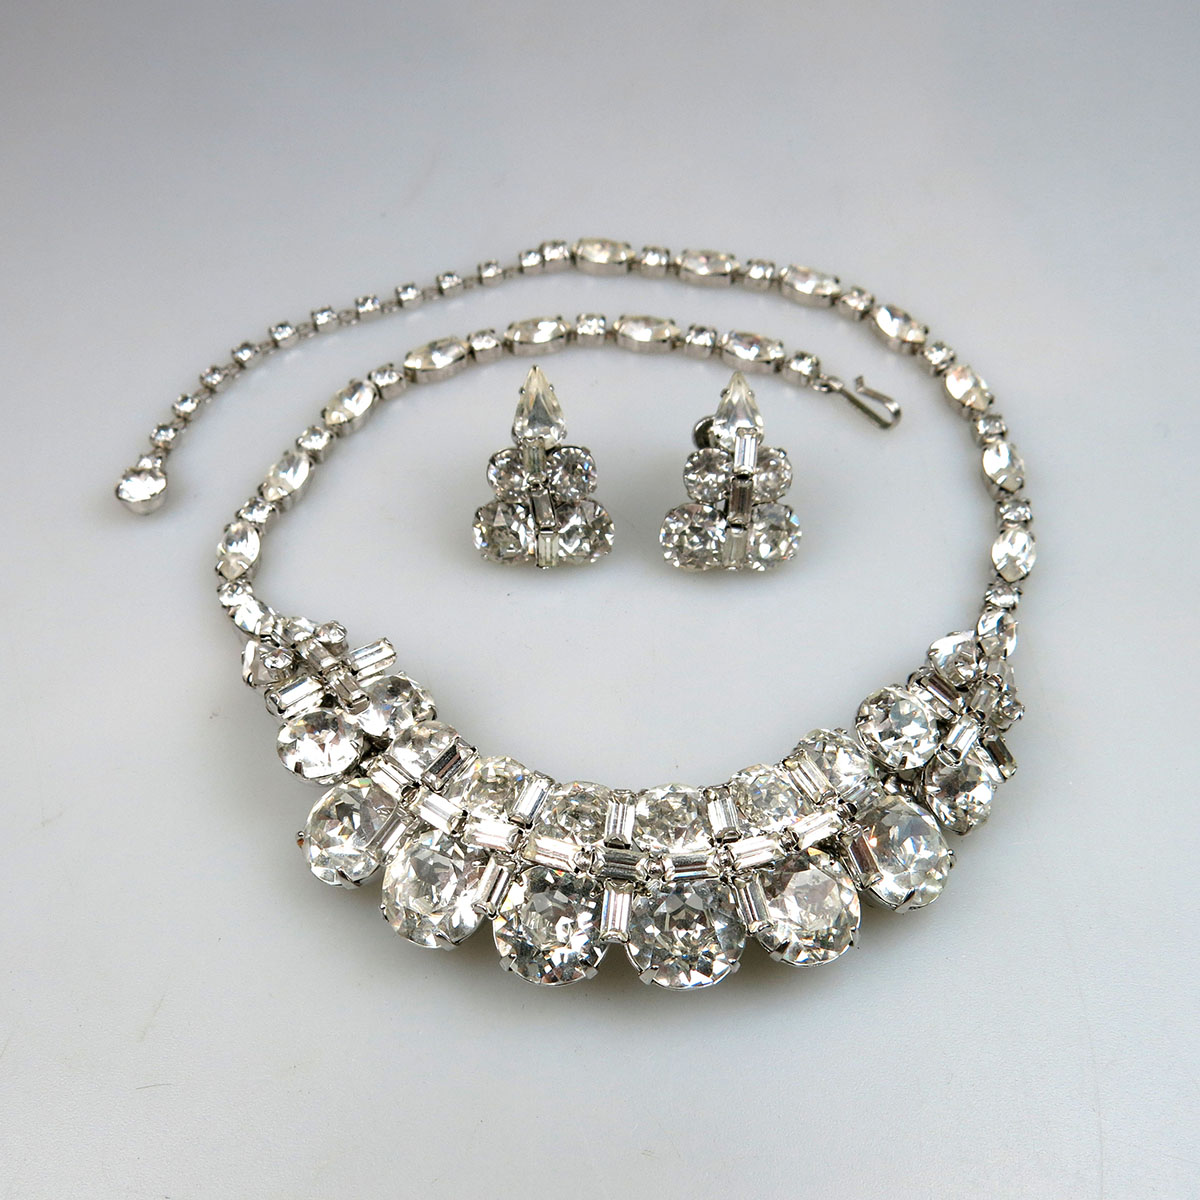 Sherman Silver-Tone Metal Necklace And Earrings